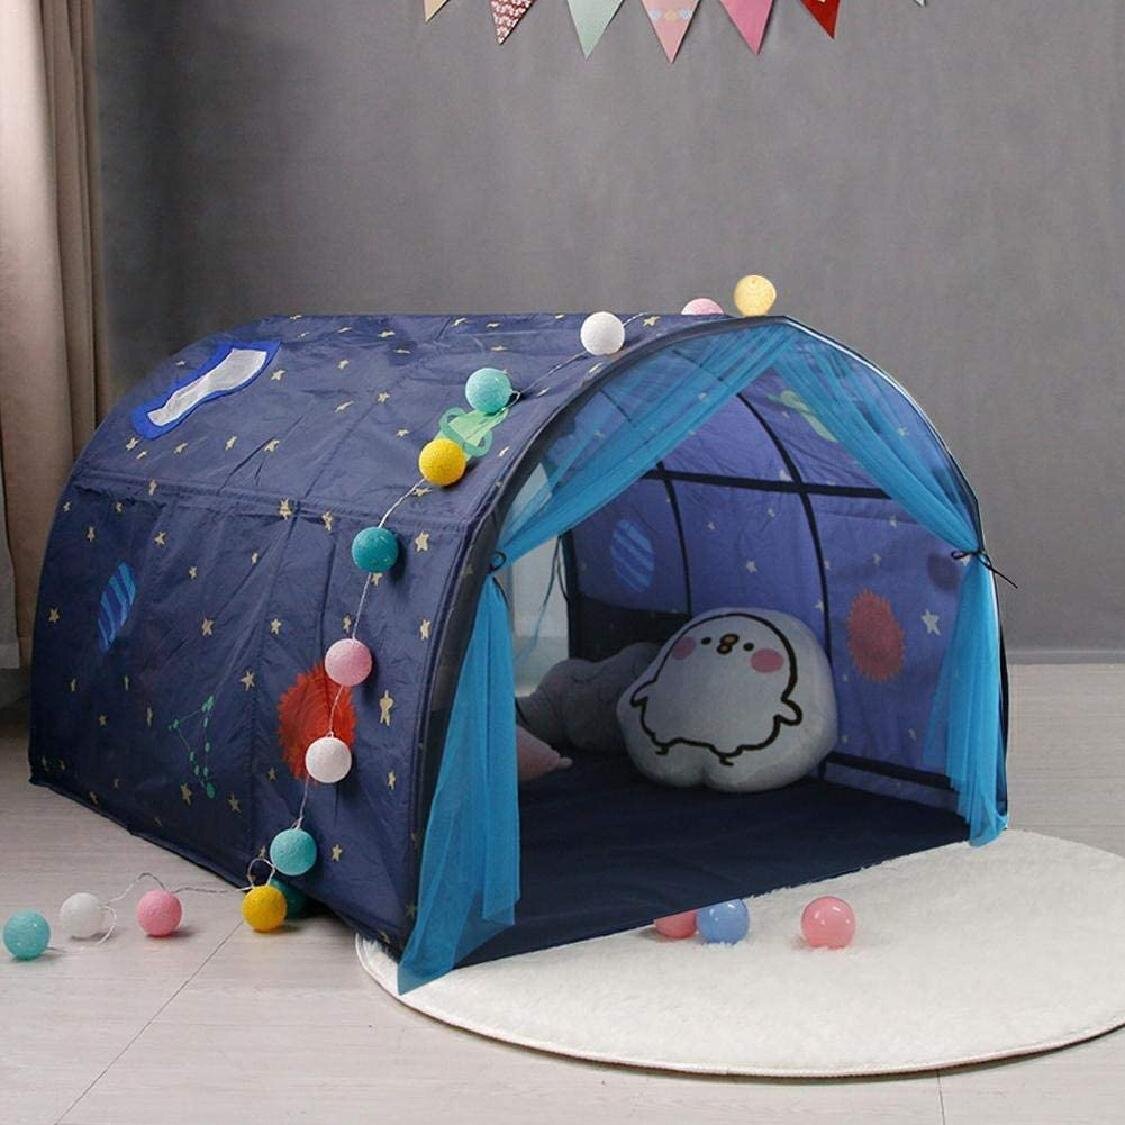 Space Theme Kids Play Tent for Boys and Girls Kids Tent Indoor & Outdoor Playhouse Imaginative Gift for Children 3 Years Old and Up Universe Dome Tent for Toddlers 